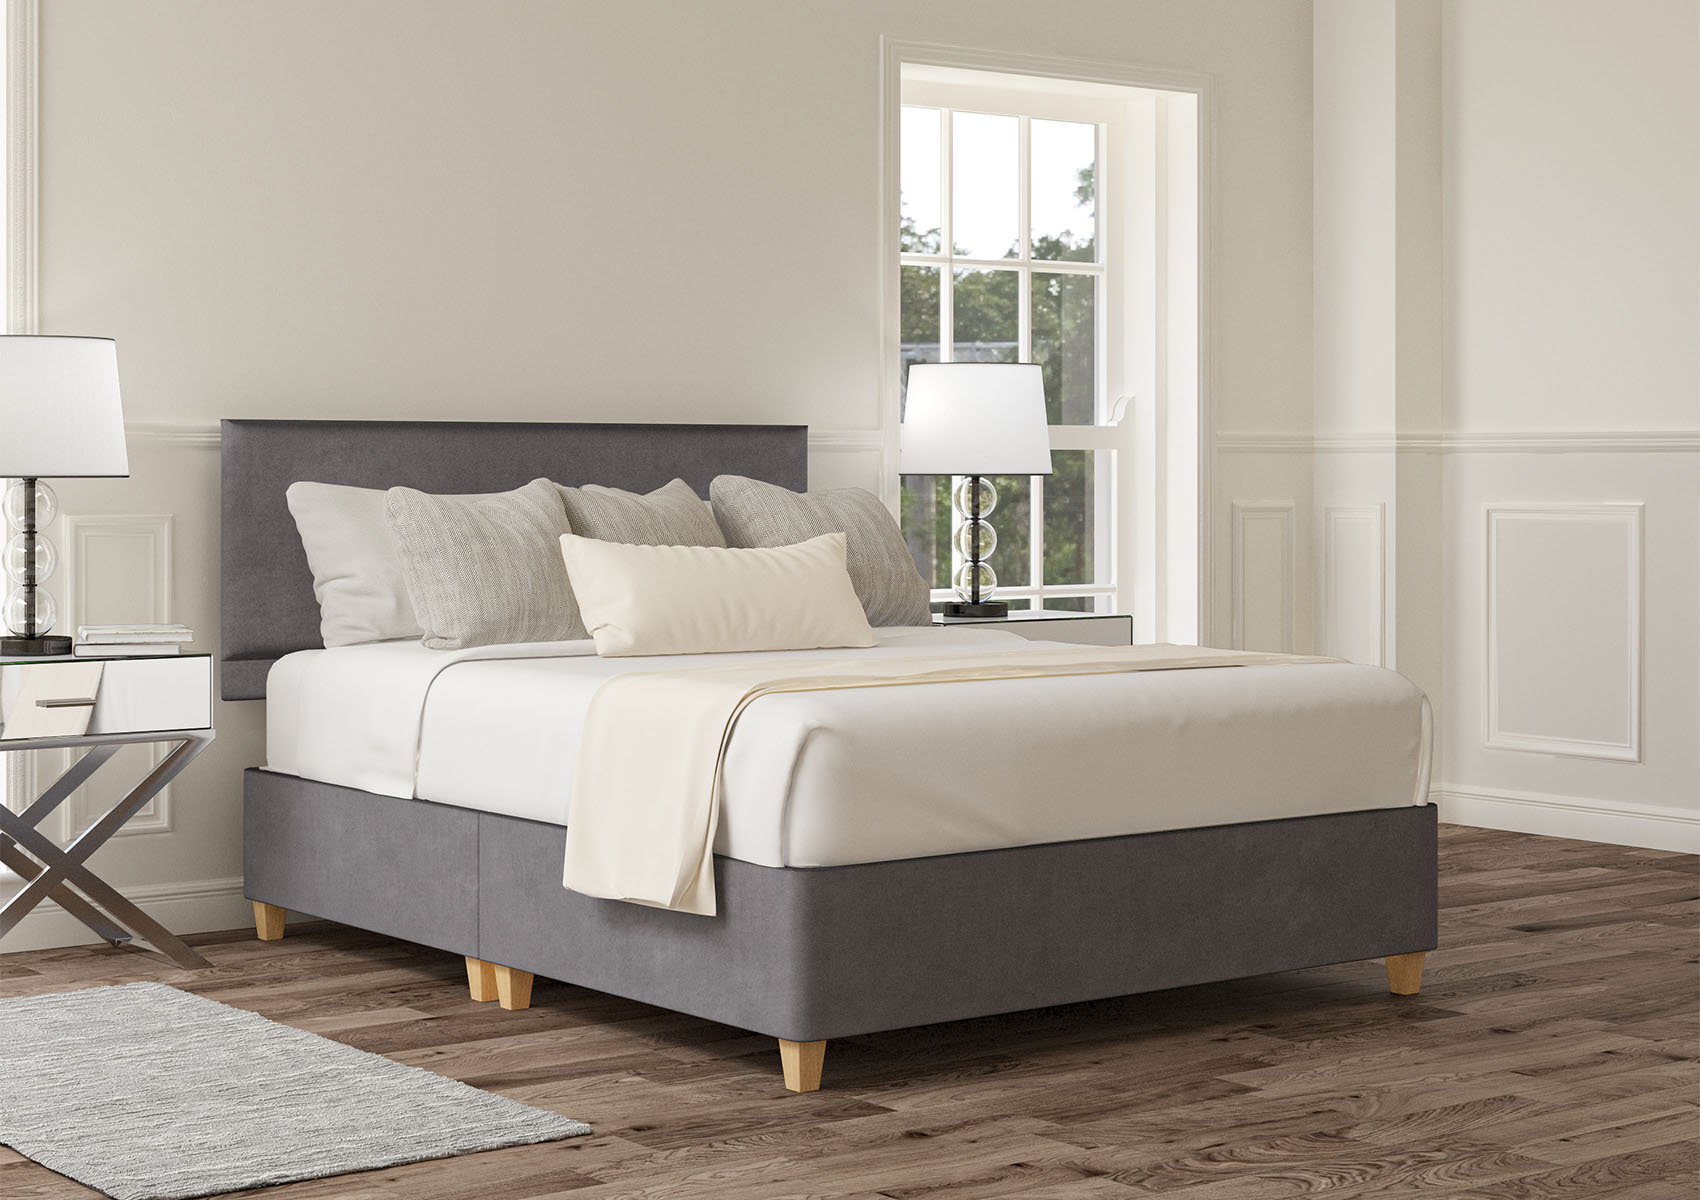 View Henley Verona Silver Upholstered Super King Bed Time4Sleep information